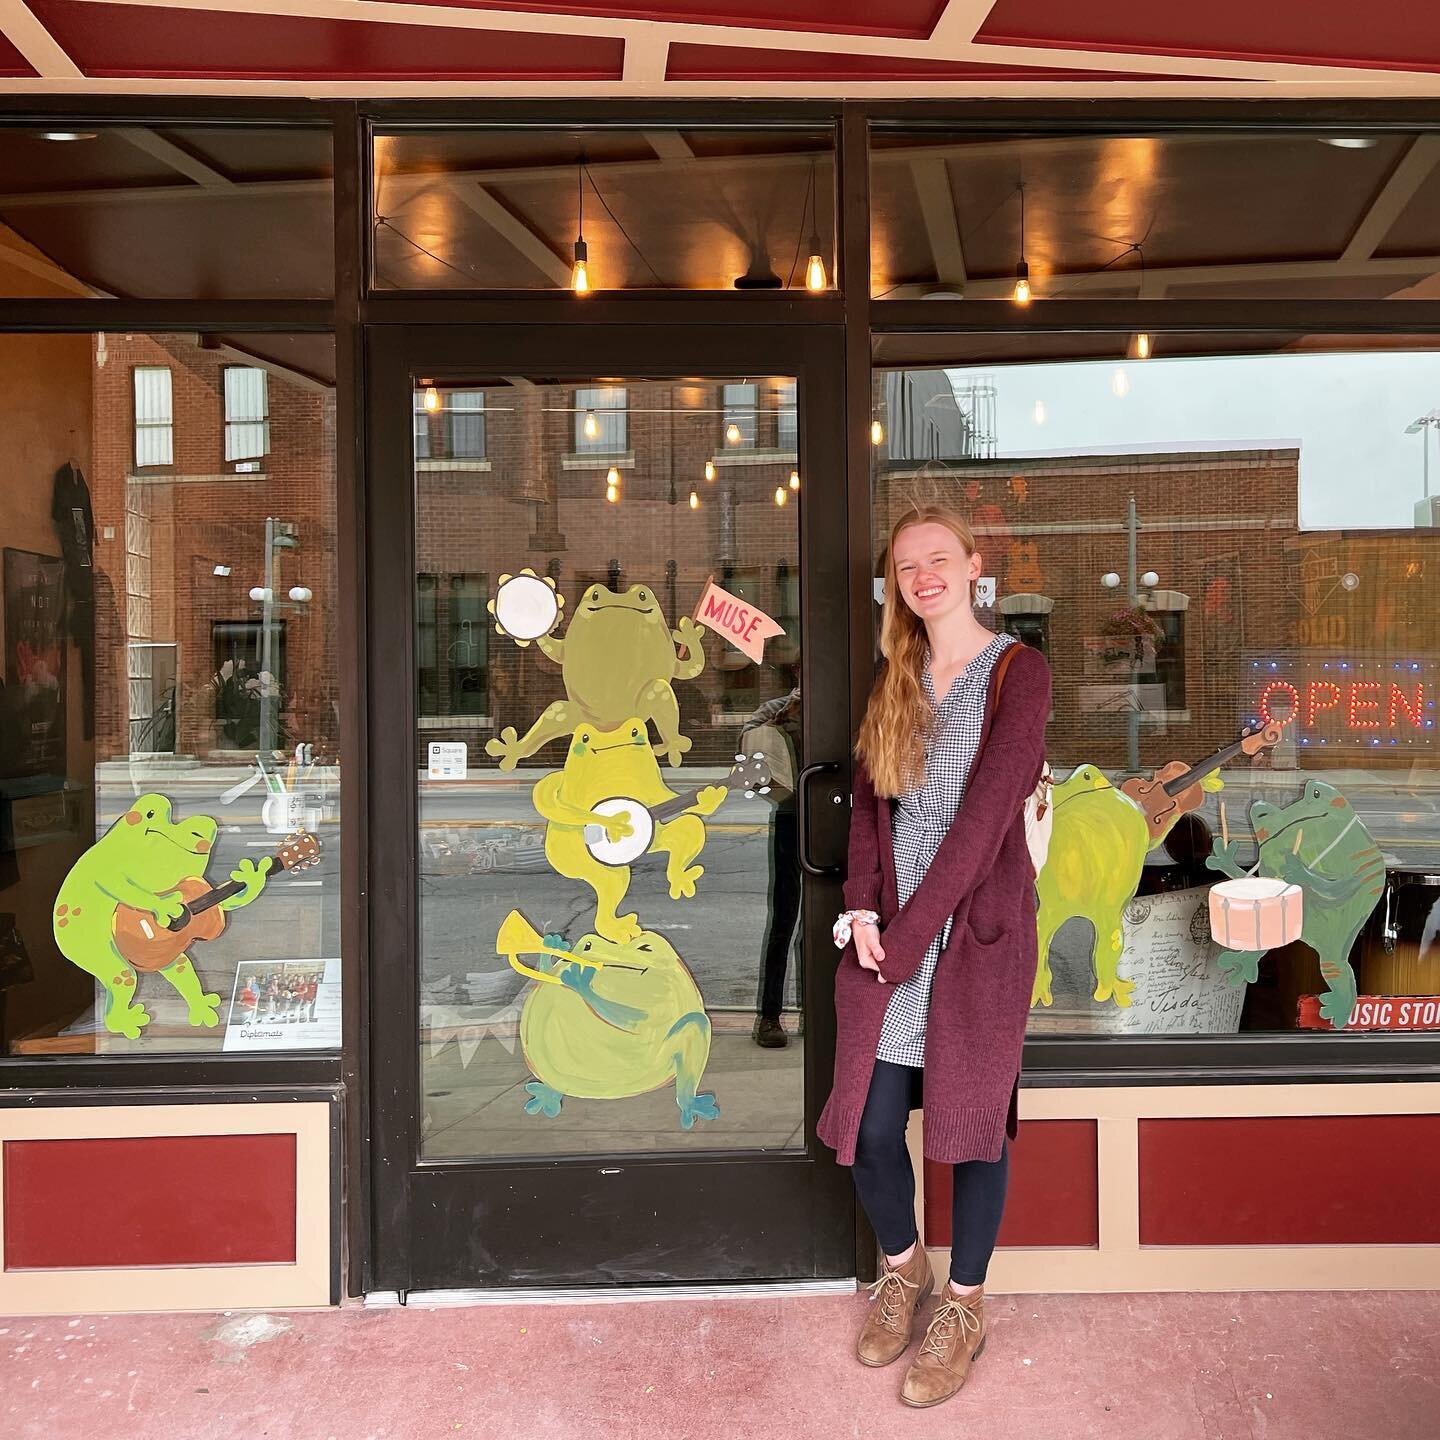 🐸🍂a mural i painted earlier this fall!

painting window murals is something i&rsquo;ve done a couple times over this summer! this year has been a year of new things: new art projects, new business ventures, new growing relationships, and new places